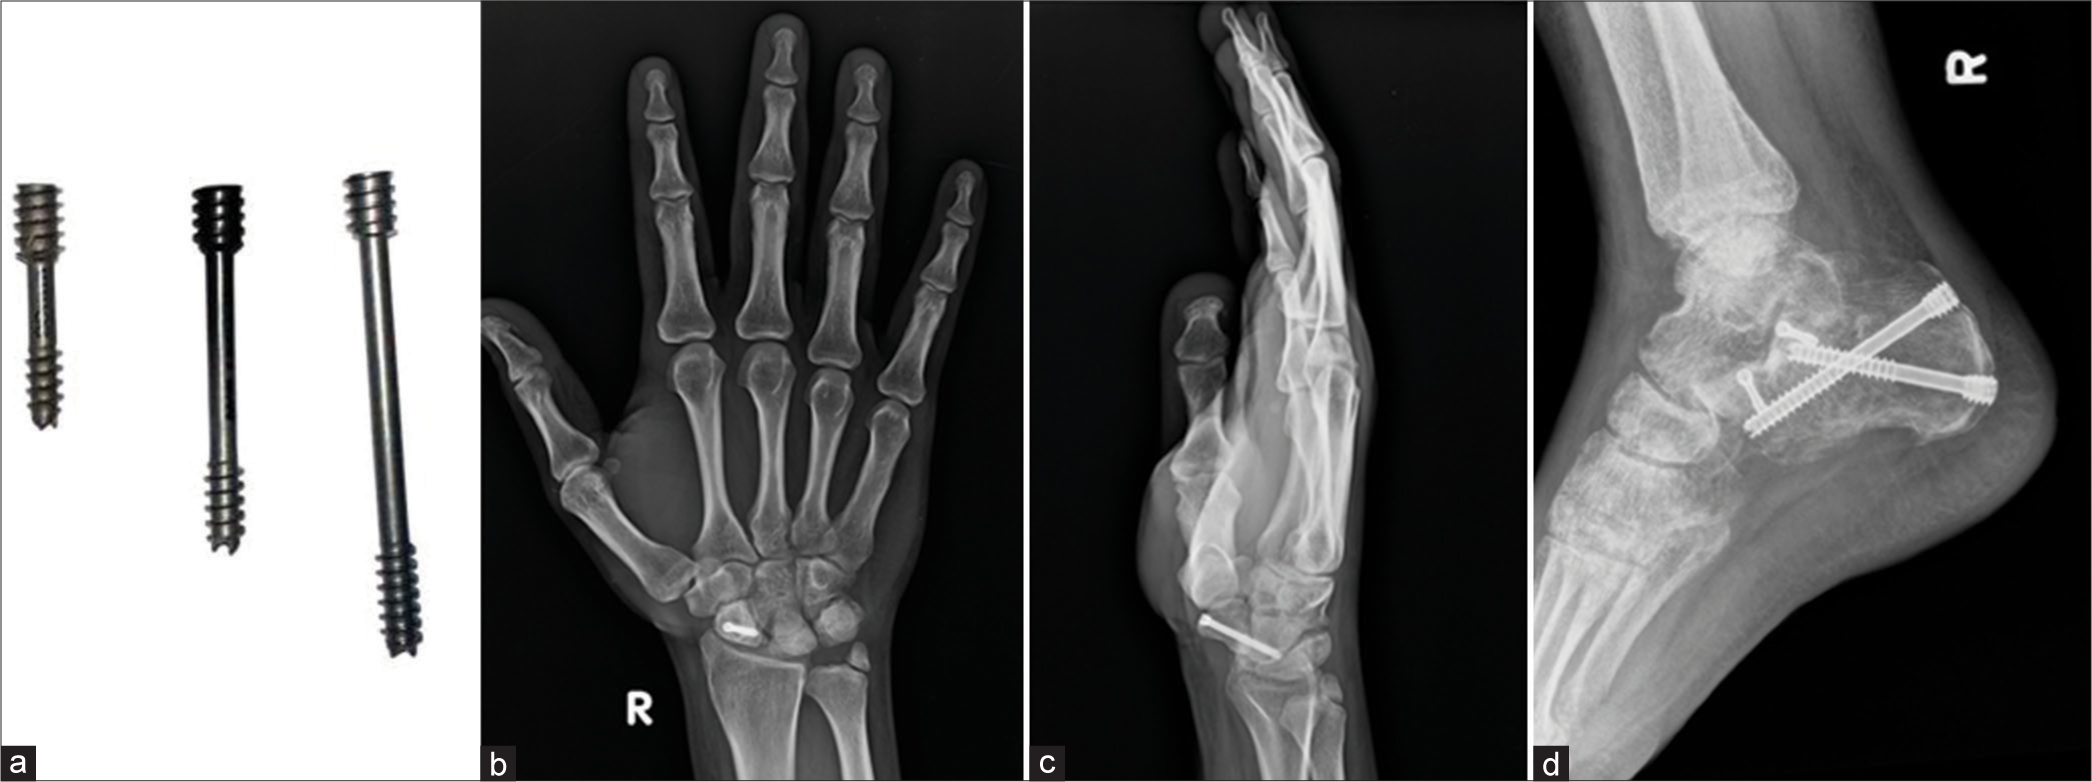 (a) Herbert screws (b and c) anteroposterior and lateral views of the right wrist showing Herbert Screw in scaphoid fracture. Also note the non-united ulnar styloid fracture. (d) Lateral view of the ankle. Herbert screws used in fracture calcaneum. Note that the larger width and greater pitch proximally than distally. Hence as the screws closes in to the bone, the differential pitch allows greater compression at fracture site.